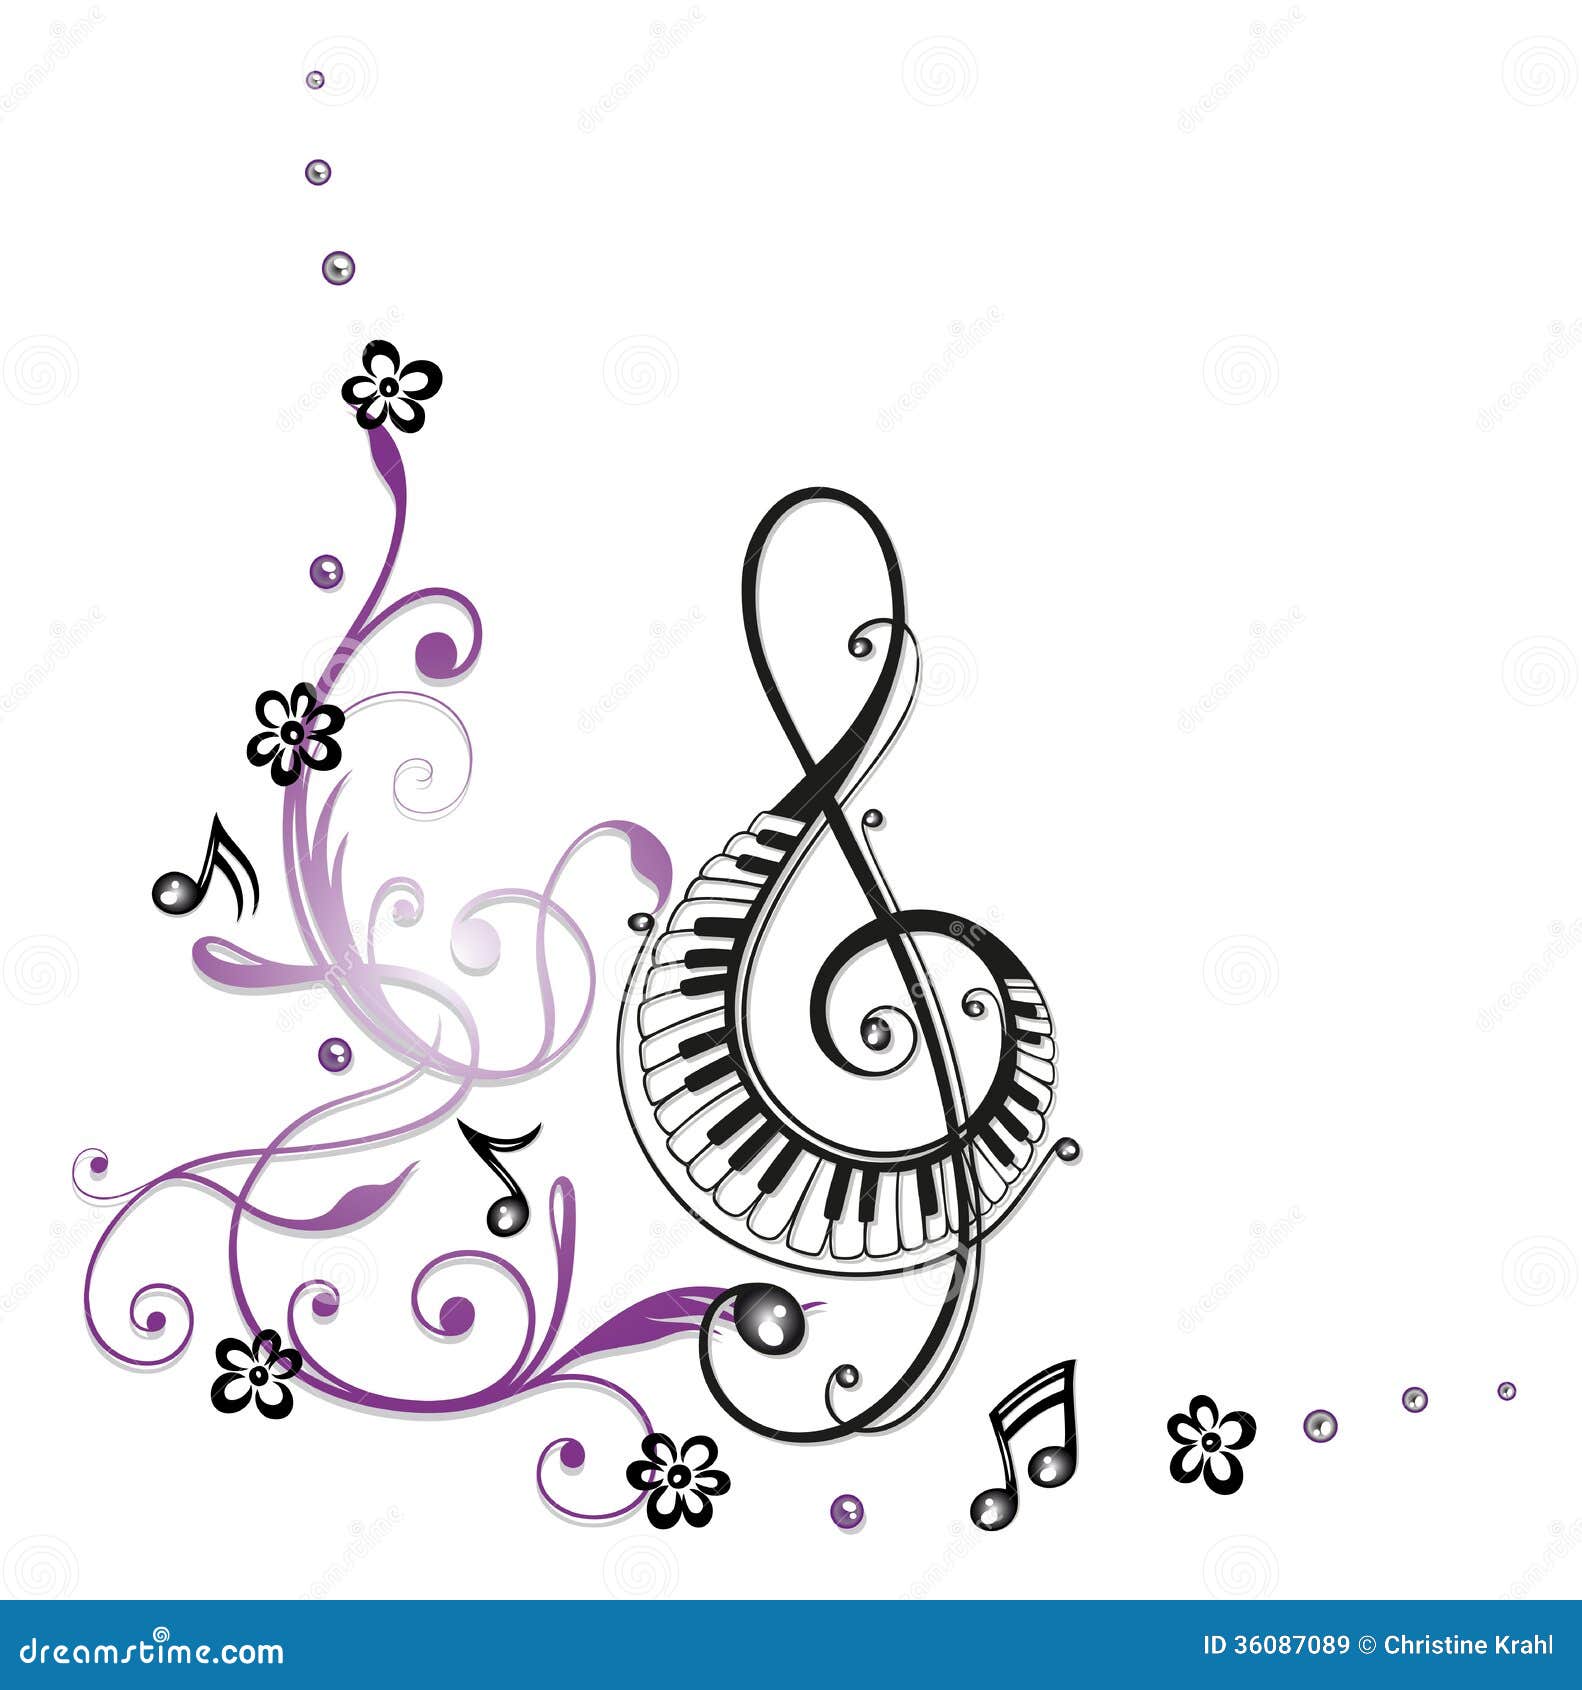 clip art music and flowers - photo #33